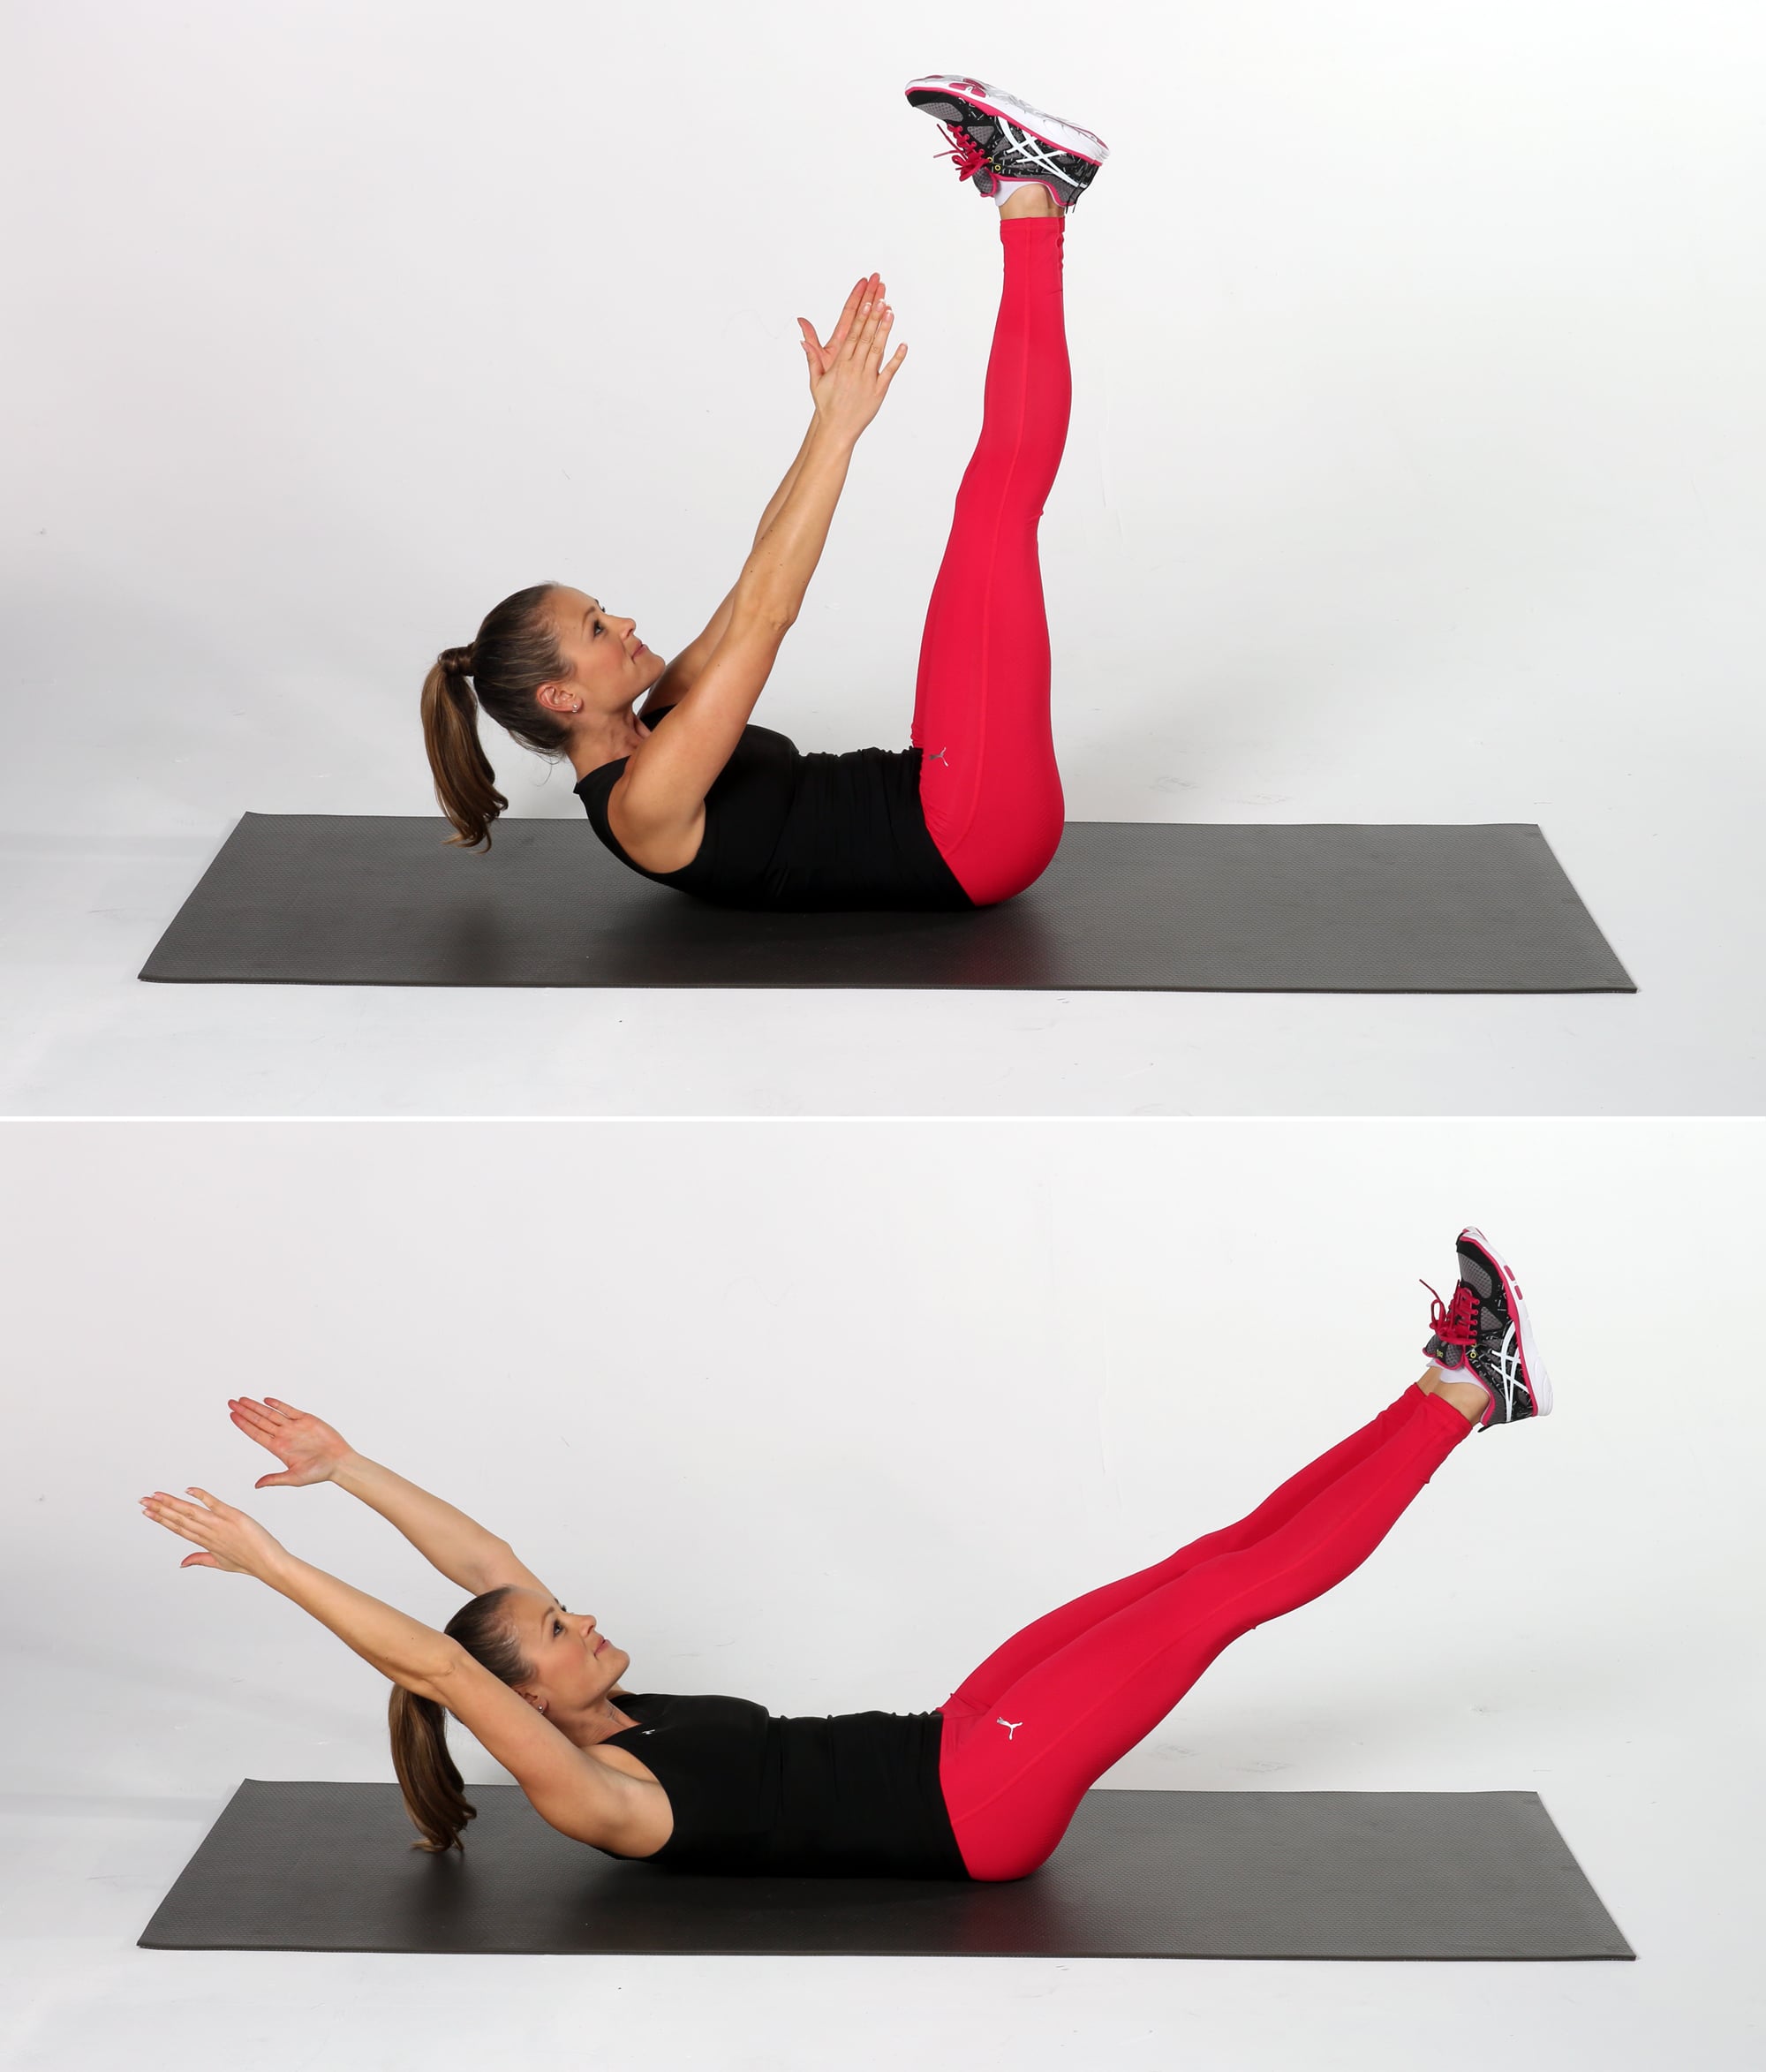 How To Do Abdominal Crunches (+17 Variations To Strengthen Your